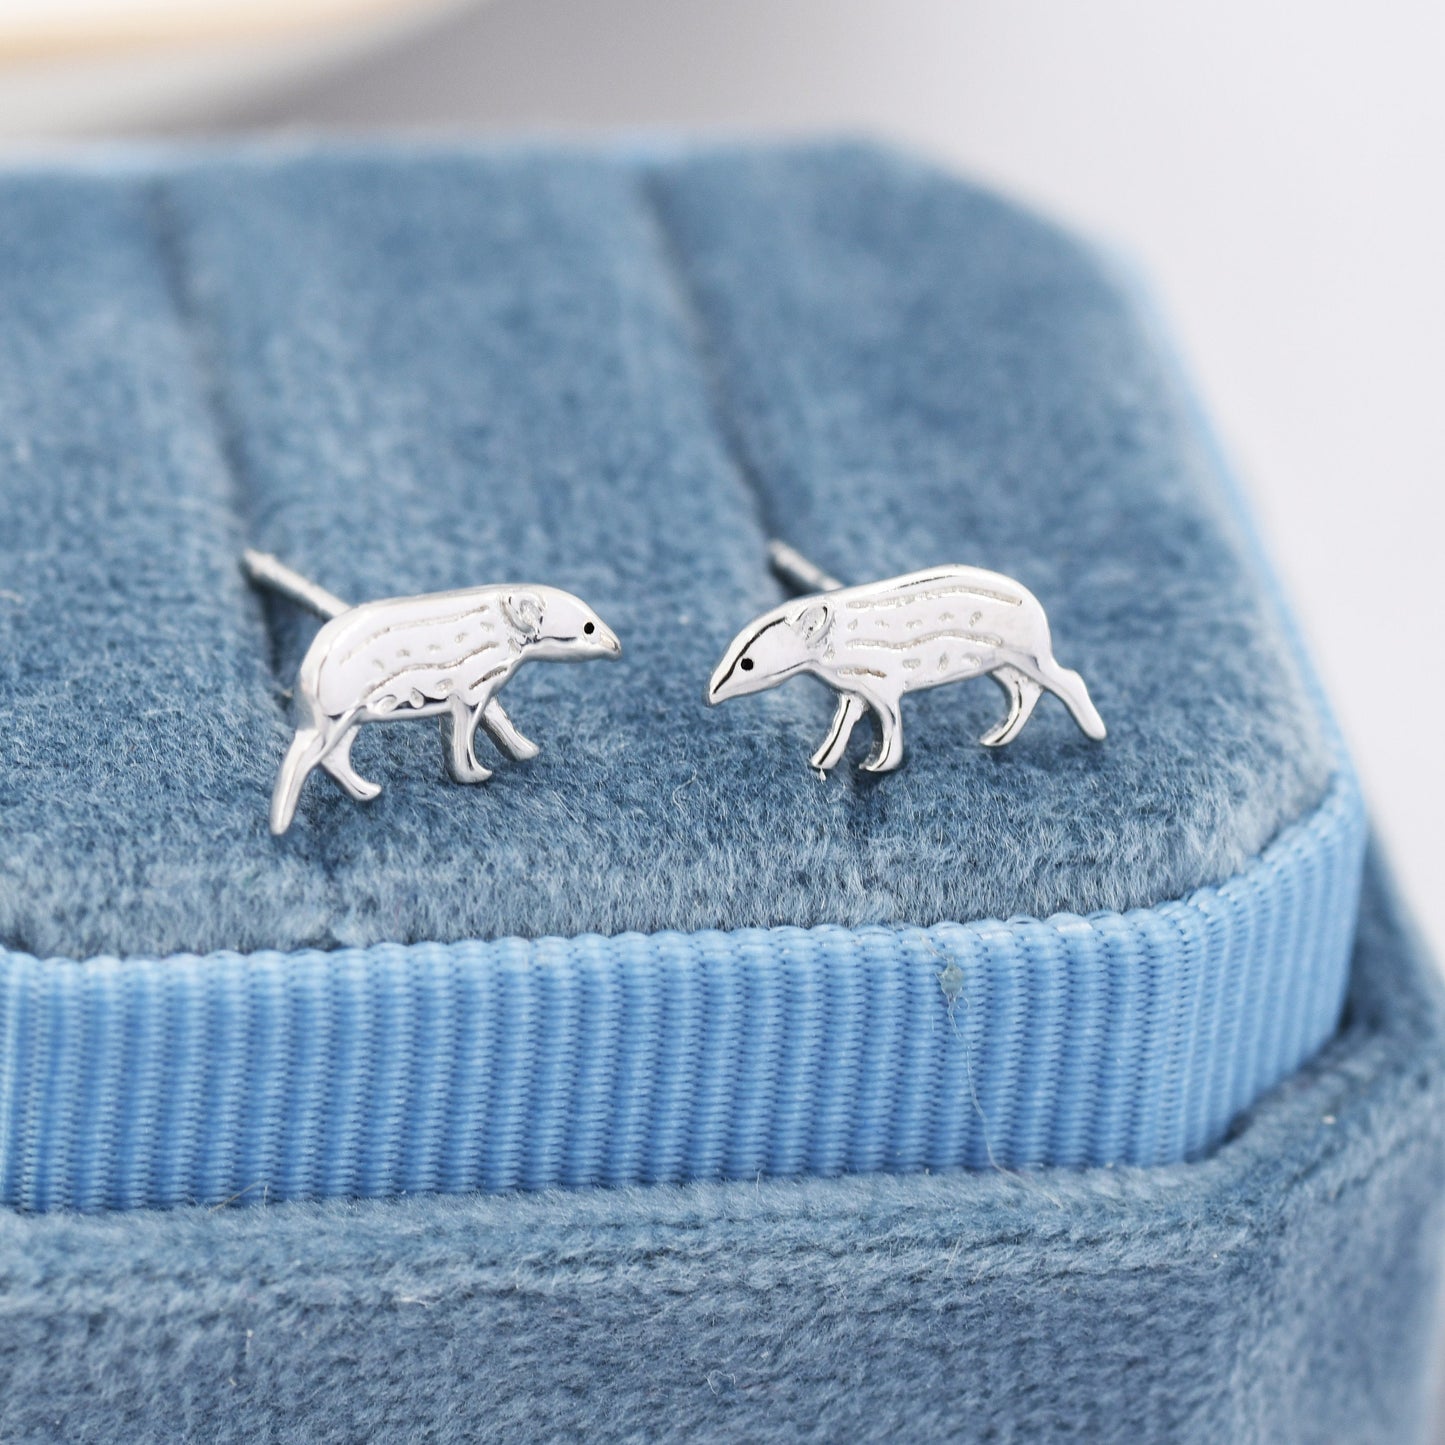 Extra Tiny Baby Tapir Stud Earrings in Sterling Silver, Silver Animal Earrings, Nature Inspired Jewellery